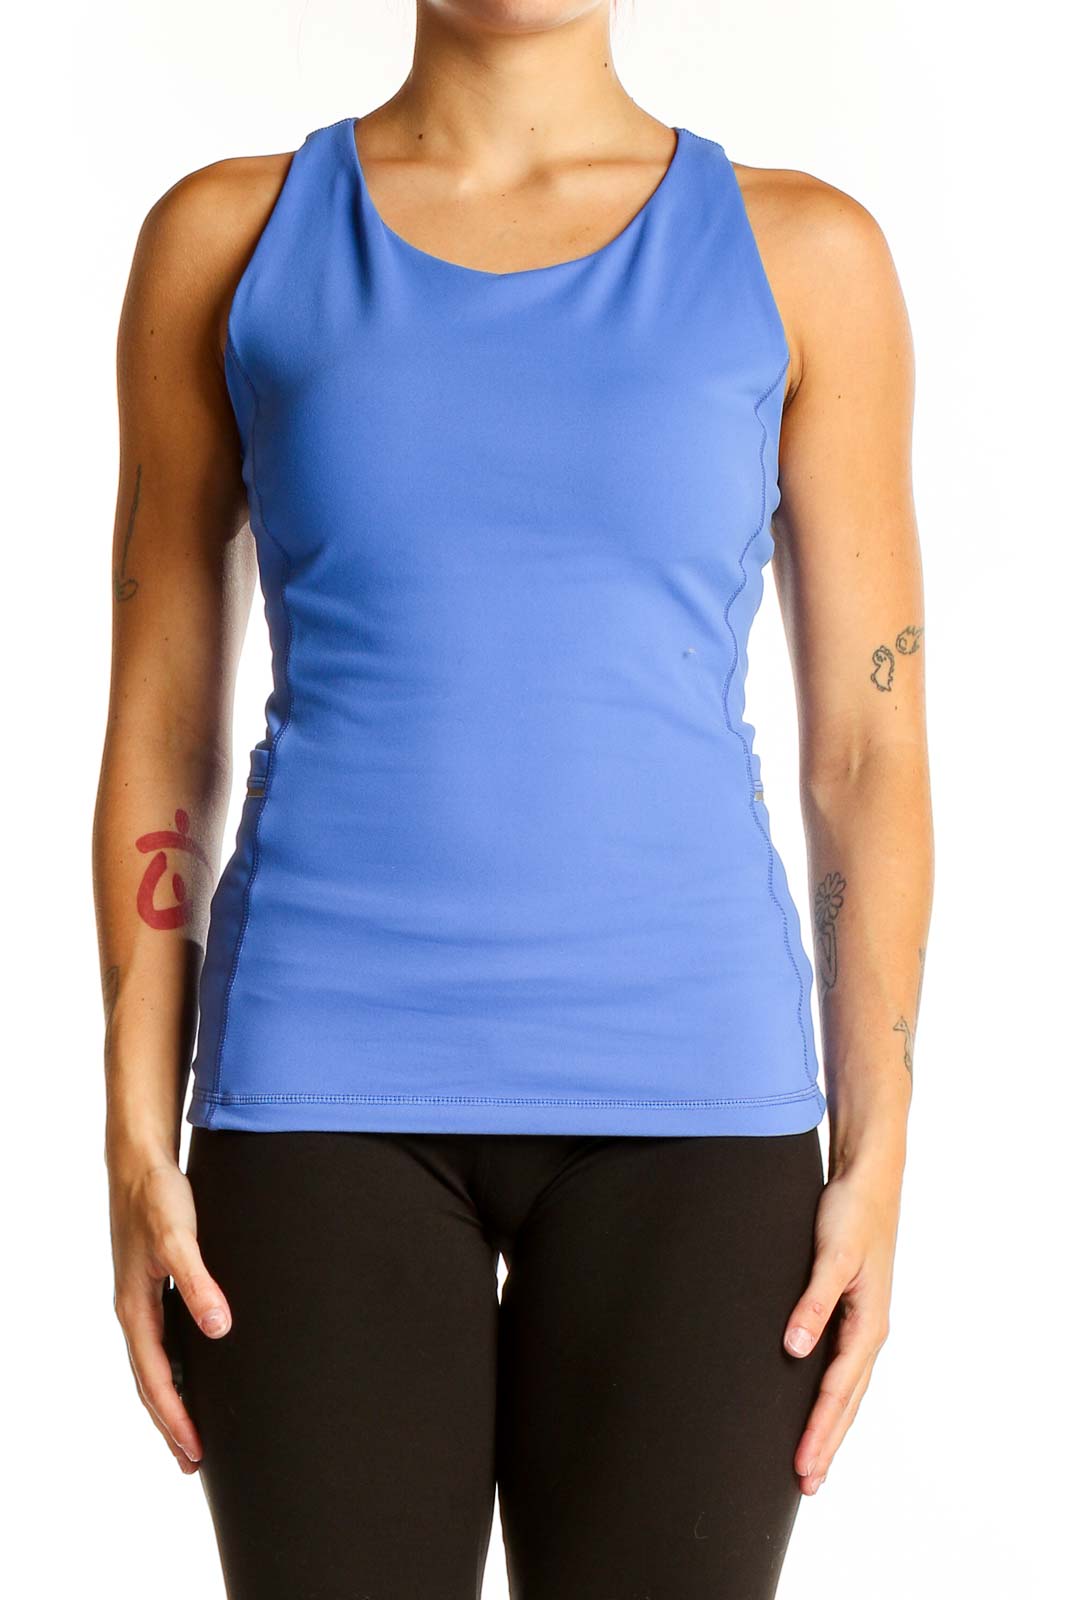 Blue Solid Top Front